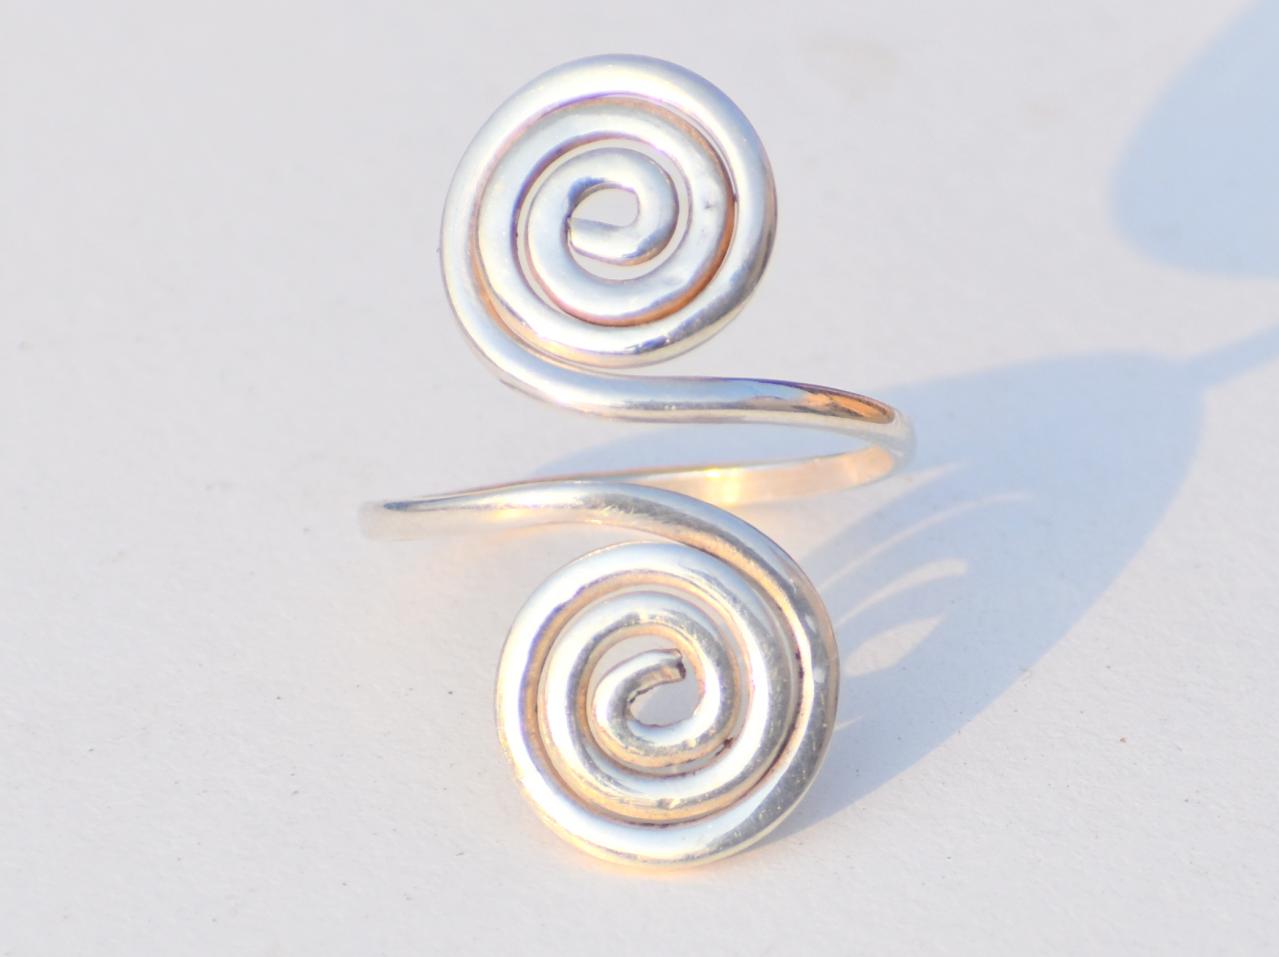 Spiral Ring, Coil Ring, 925 Silver Ring, Handmade Ring, Round Spiral Ring, Statement Ring, Anniversary Gift, Christmas Gift, Gift For Women